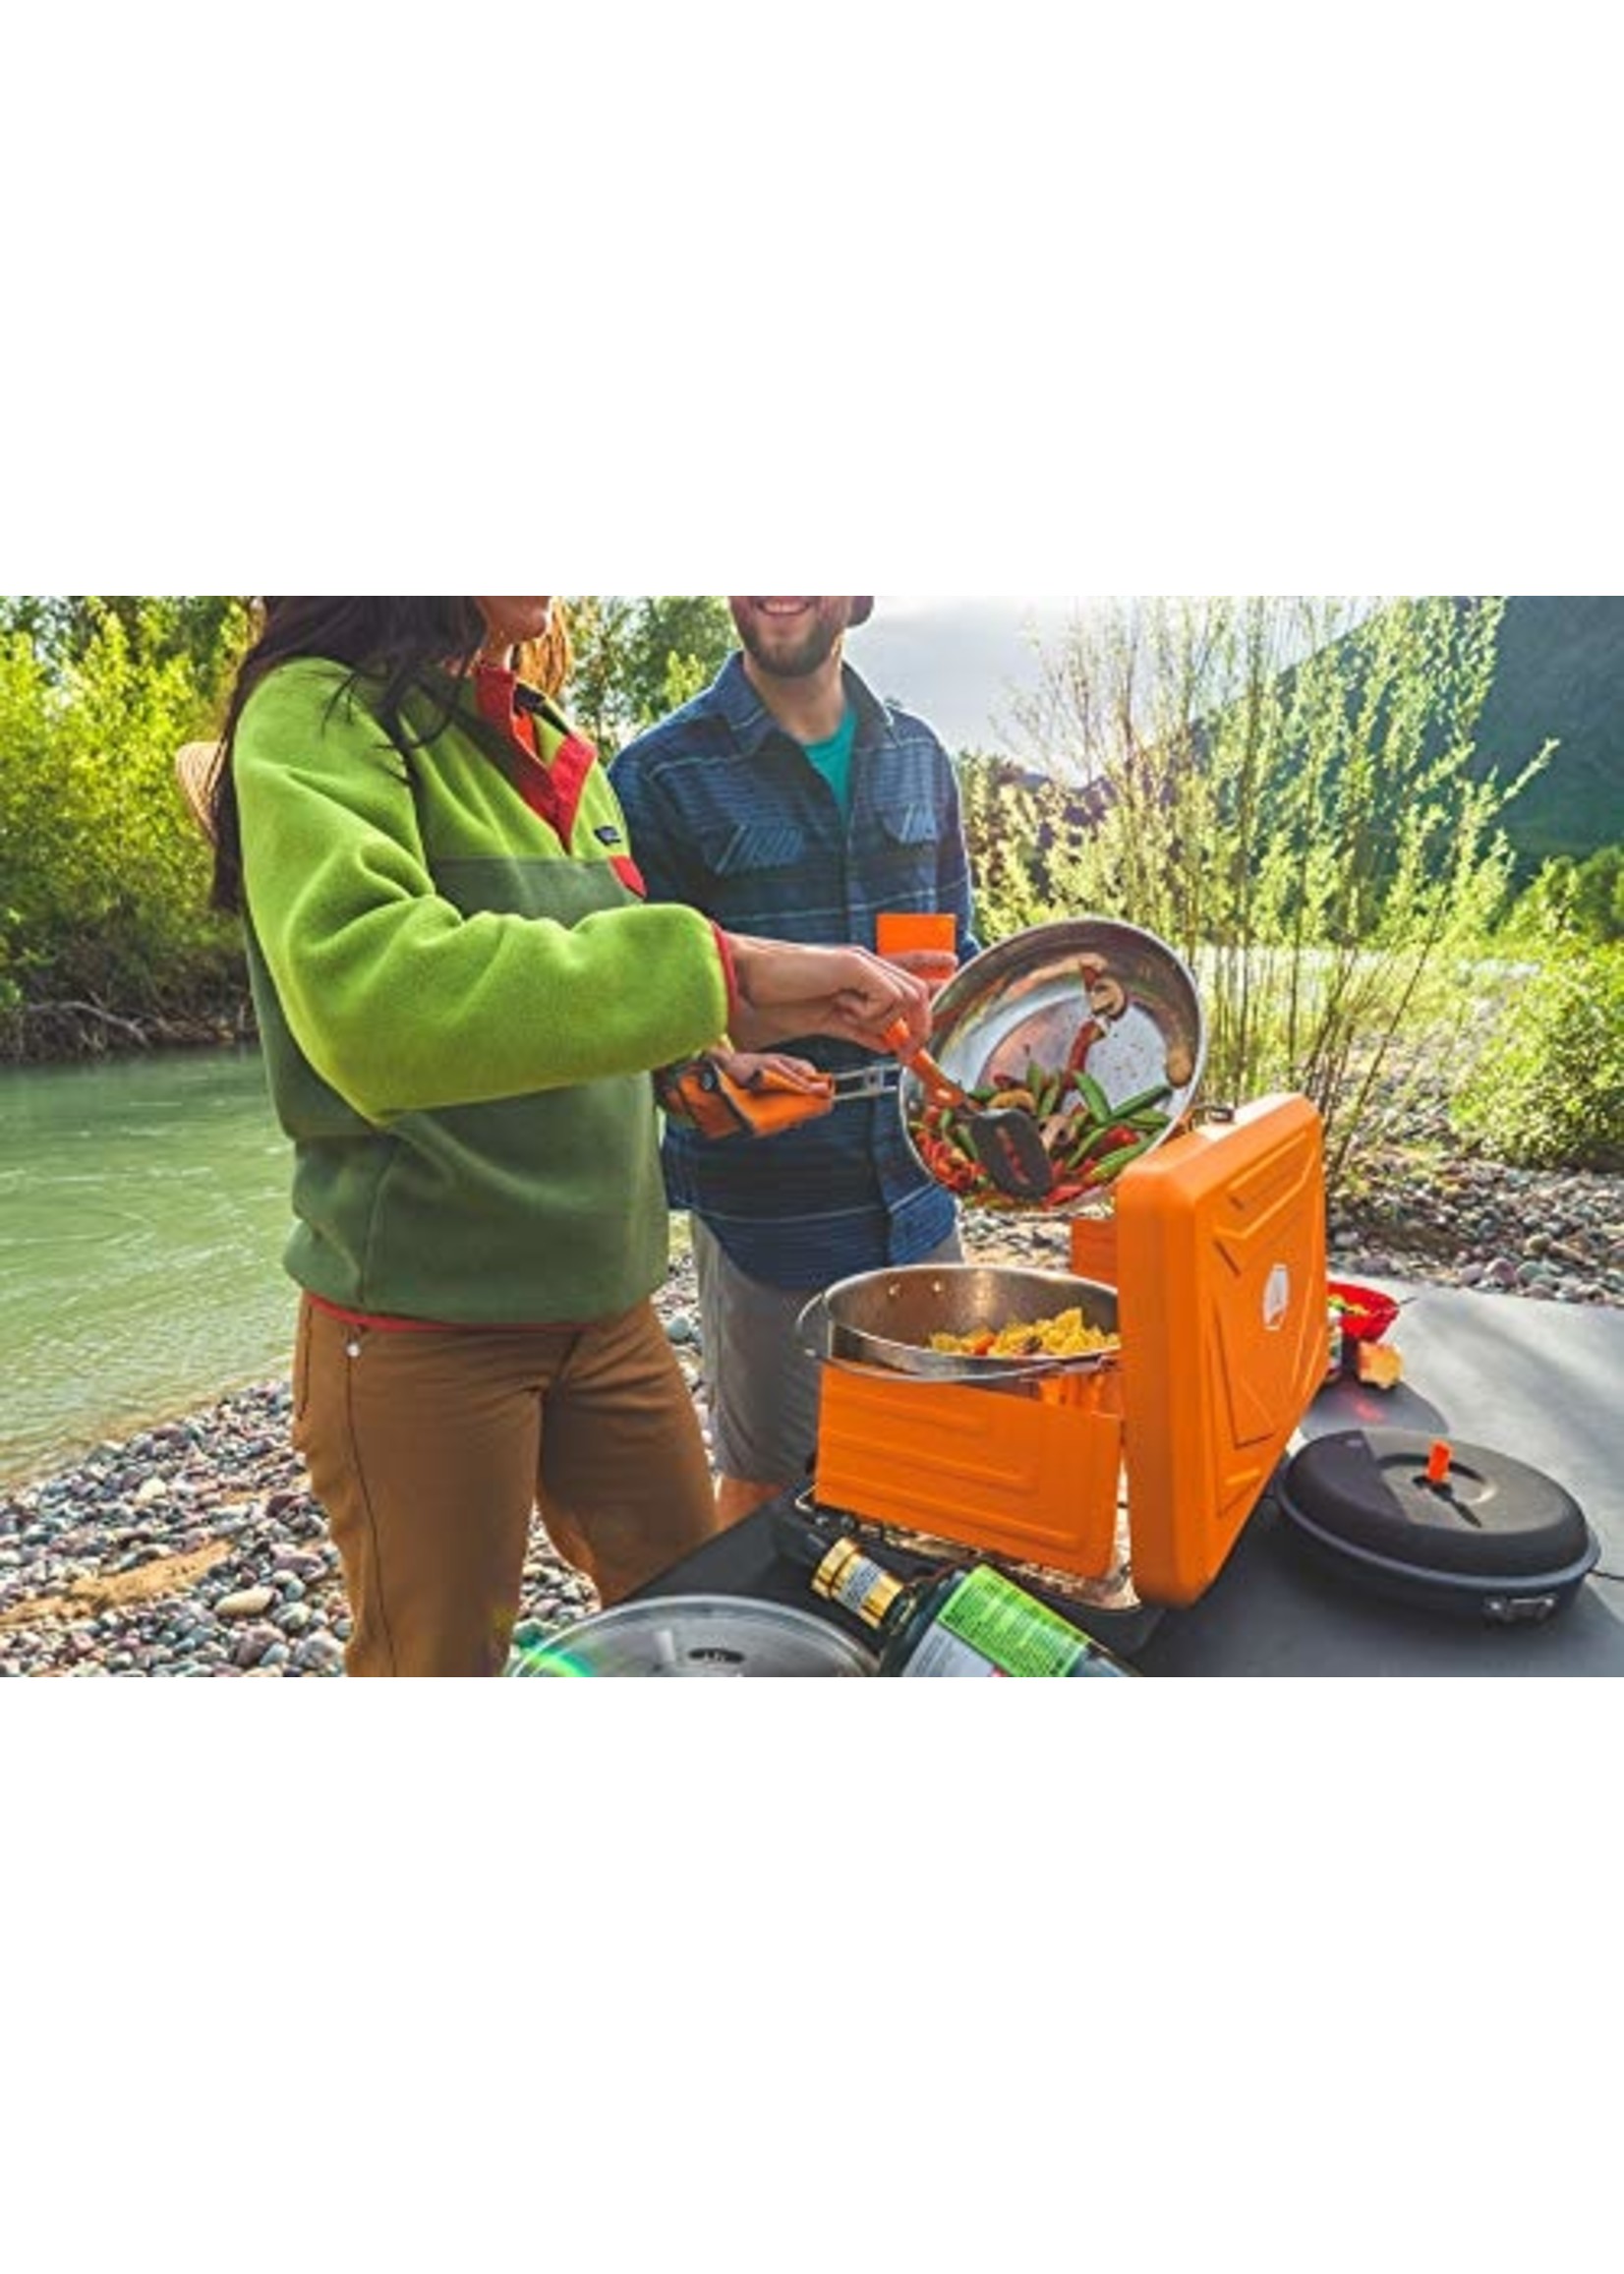 GSI Outdoors Selkirk 460 Camp Stove